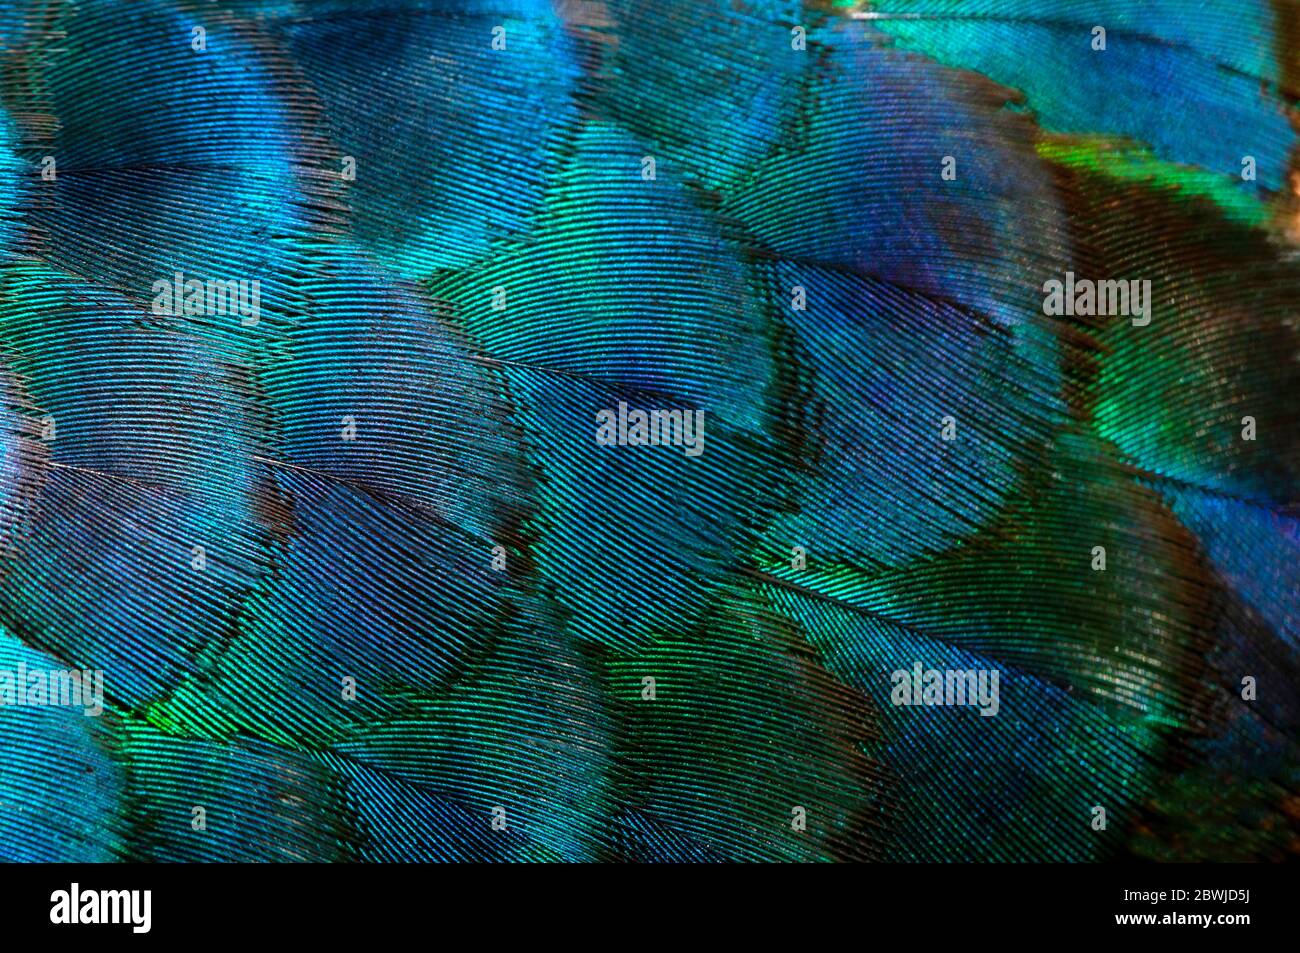 Close-up Peacocks, colorful details and beautiful peacock feathers.Macro photograph. Stock Photo